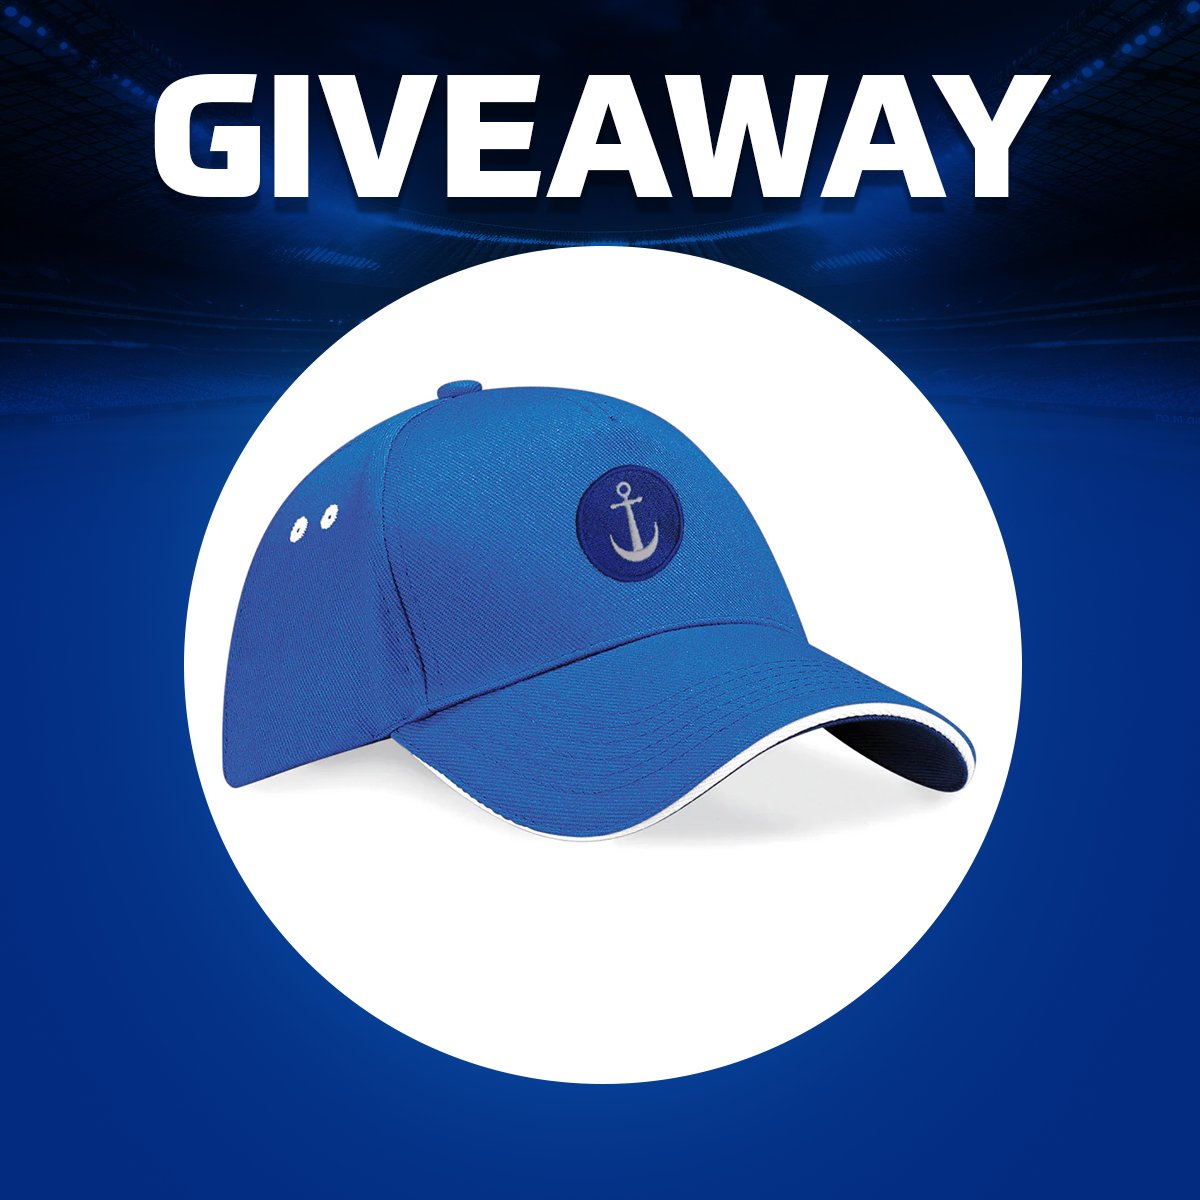 🚨 GIVEAWAY 🚨 We have a prize up for grabs for the game against Wigan 👀 For your chance to win one of our varsity caps, simply predict the correct result against Wigan on our website ✅ Enter here ➡️ playuppompey.com